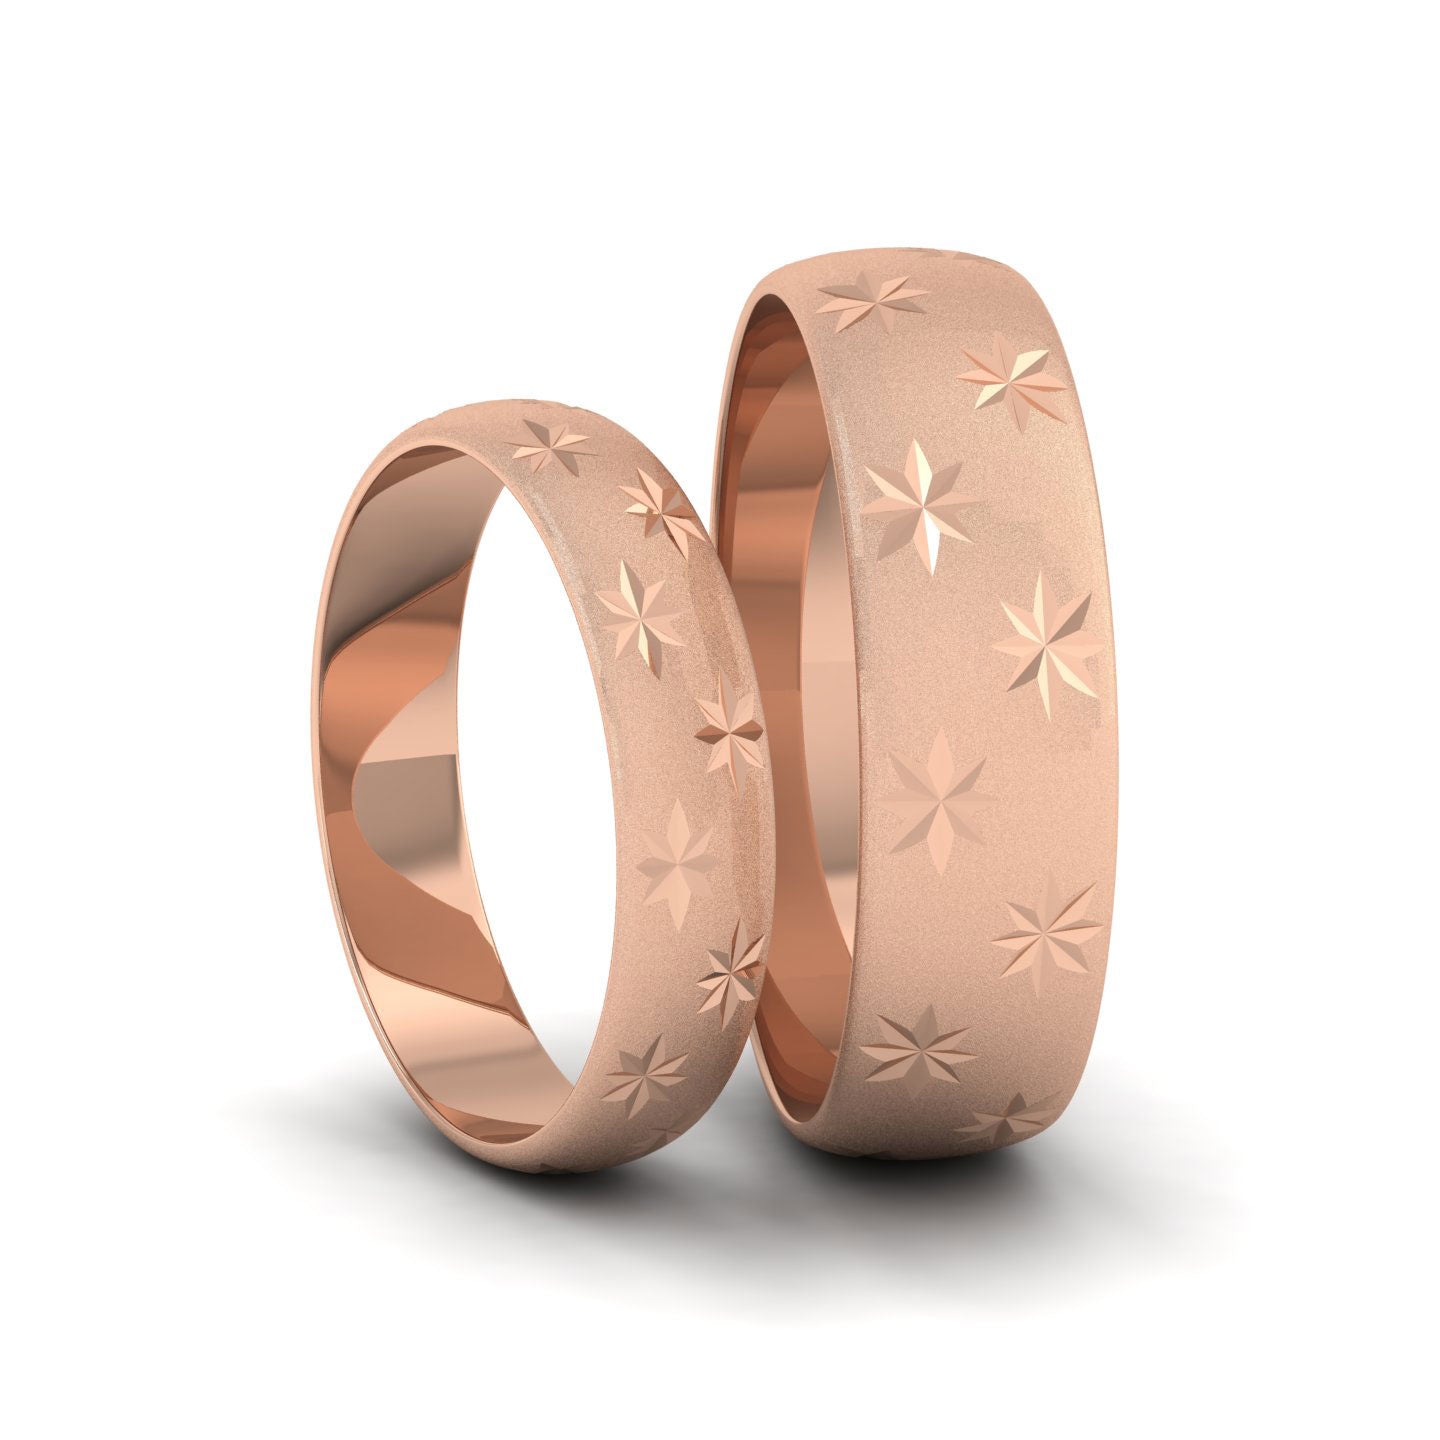 Star Patterned 9ct Rose Gold 6mm Wedding Ring